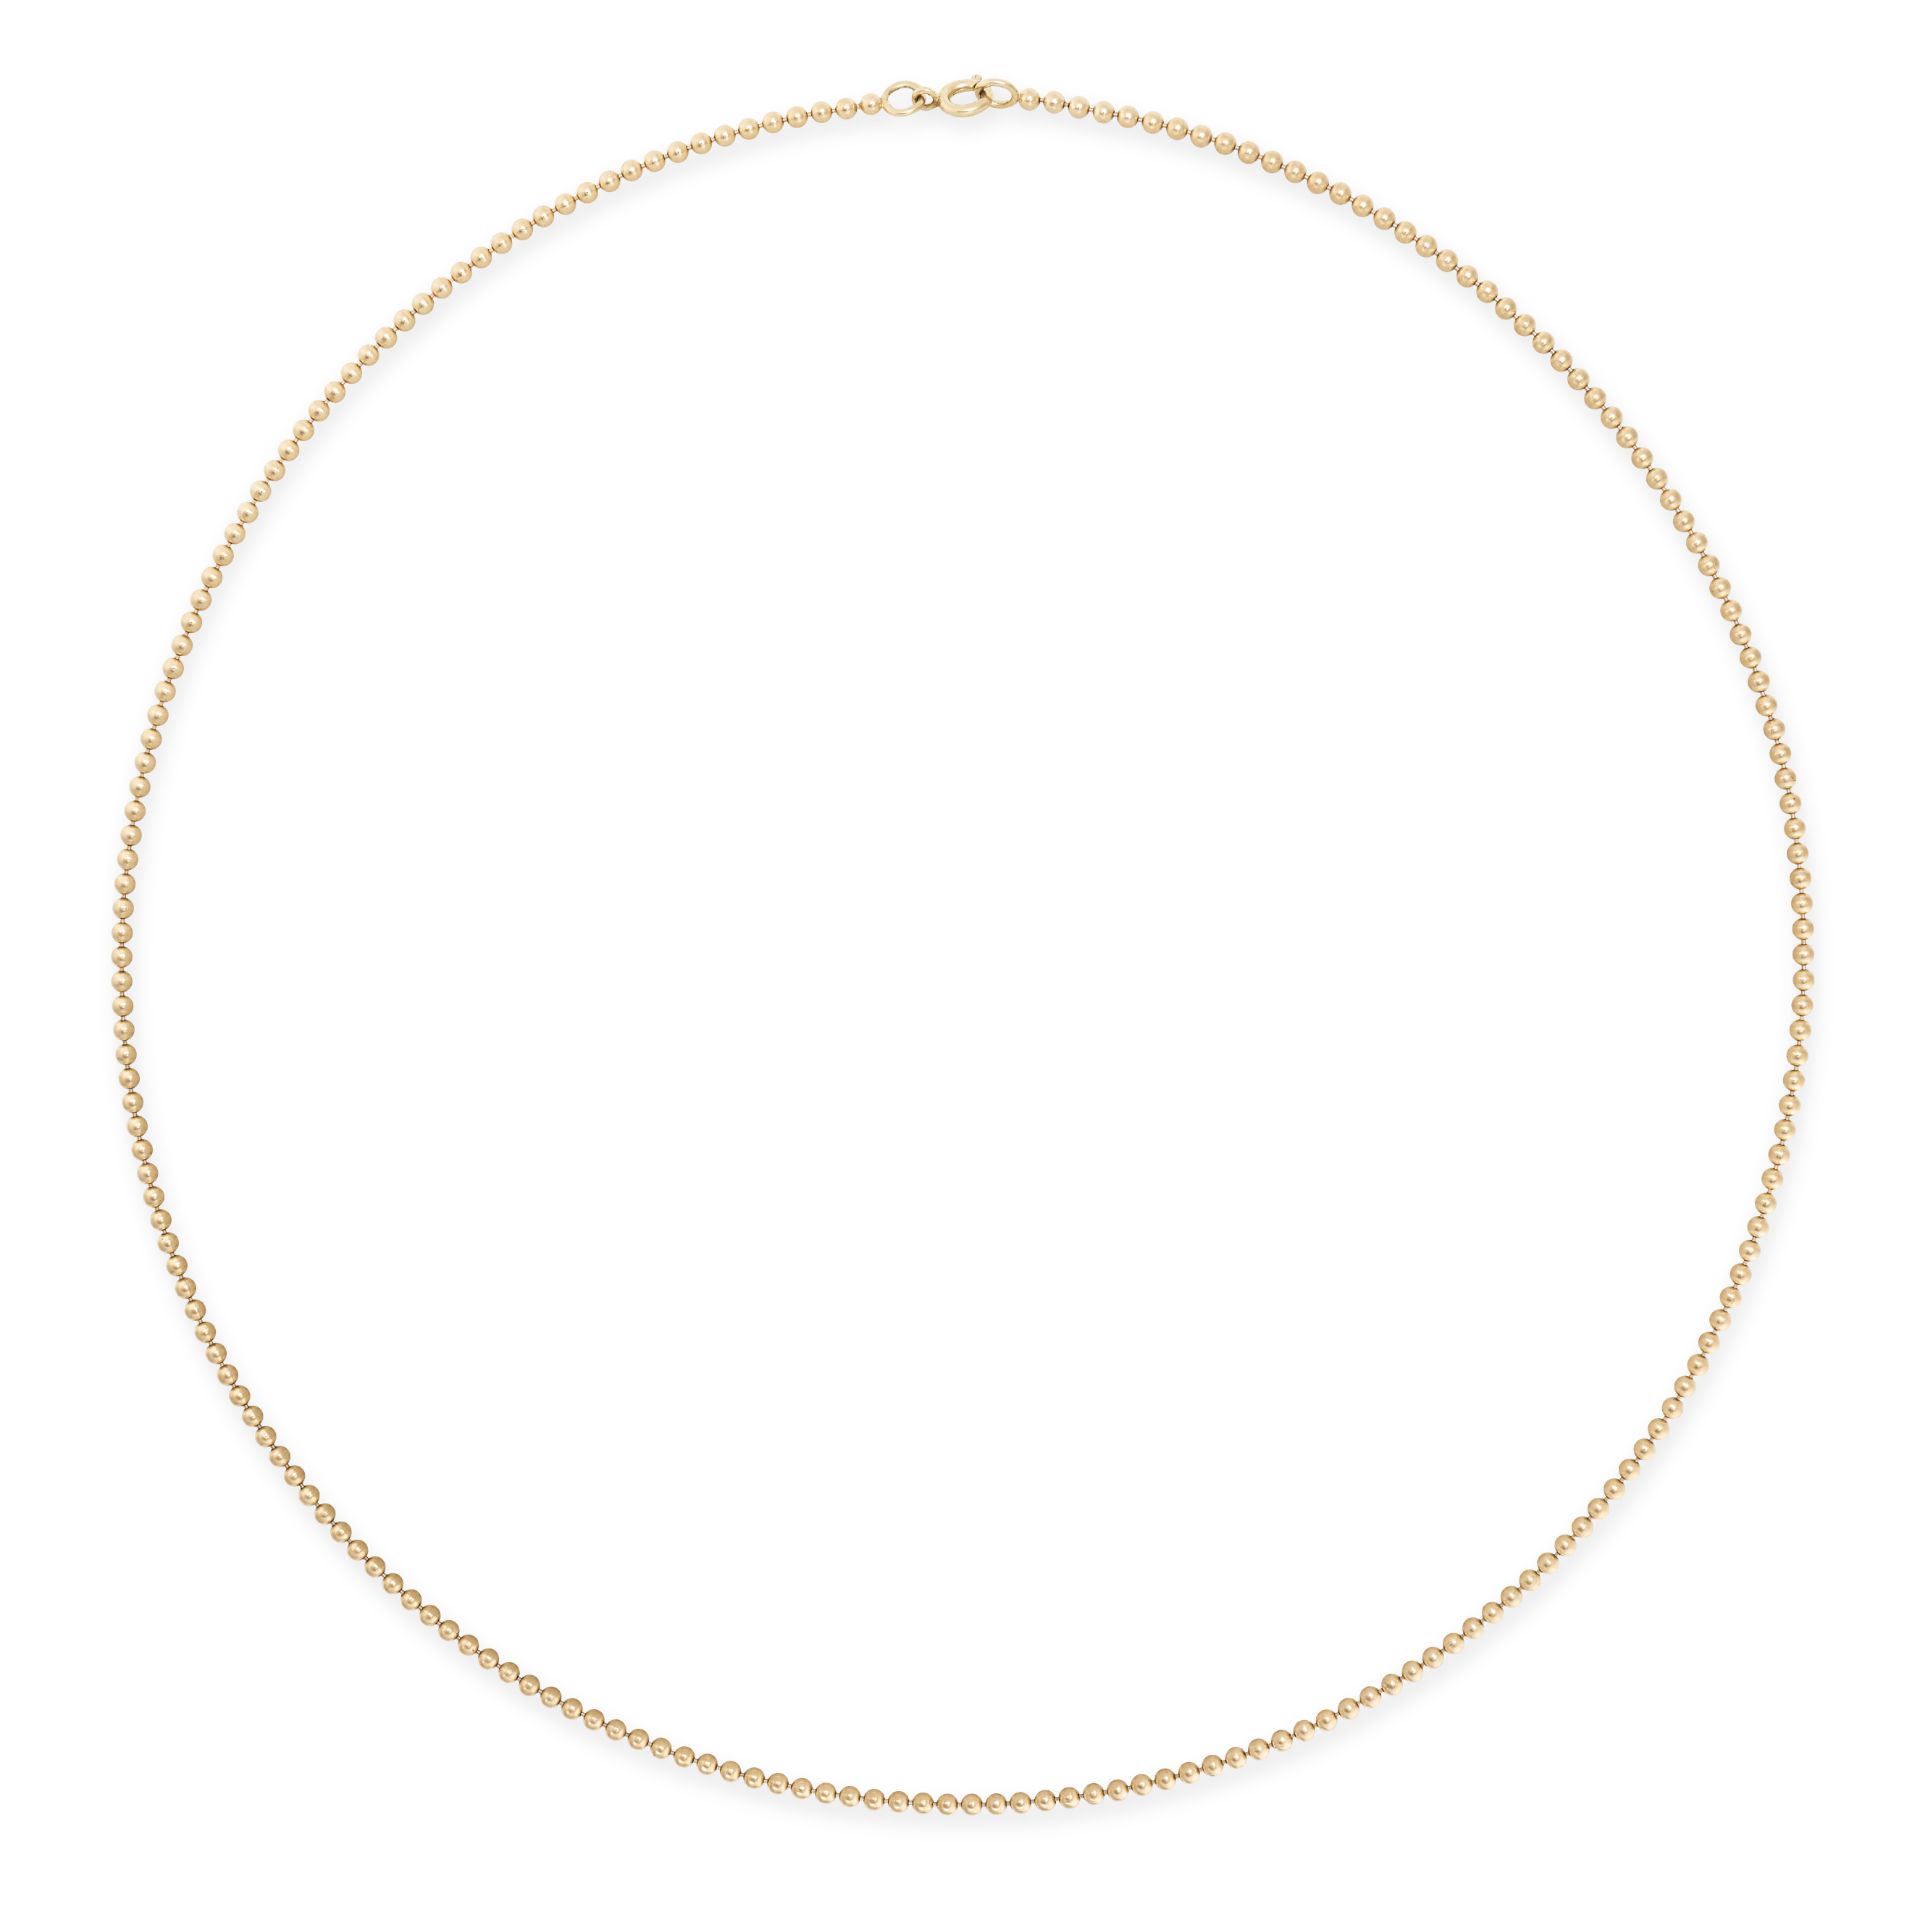 A GOLD NECKLACE in 9ct yellow gold, comprising a row of gold beads, stamped 375 9K, 52.0cm, 9.0g.